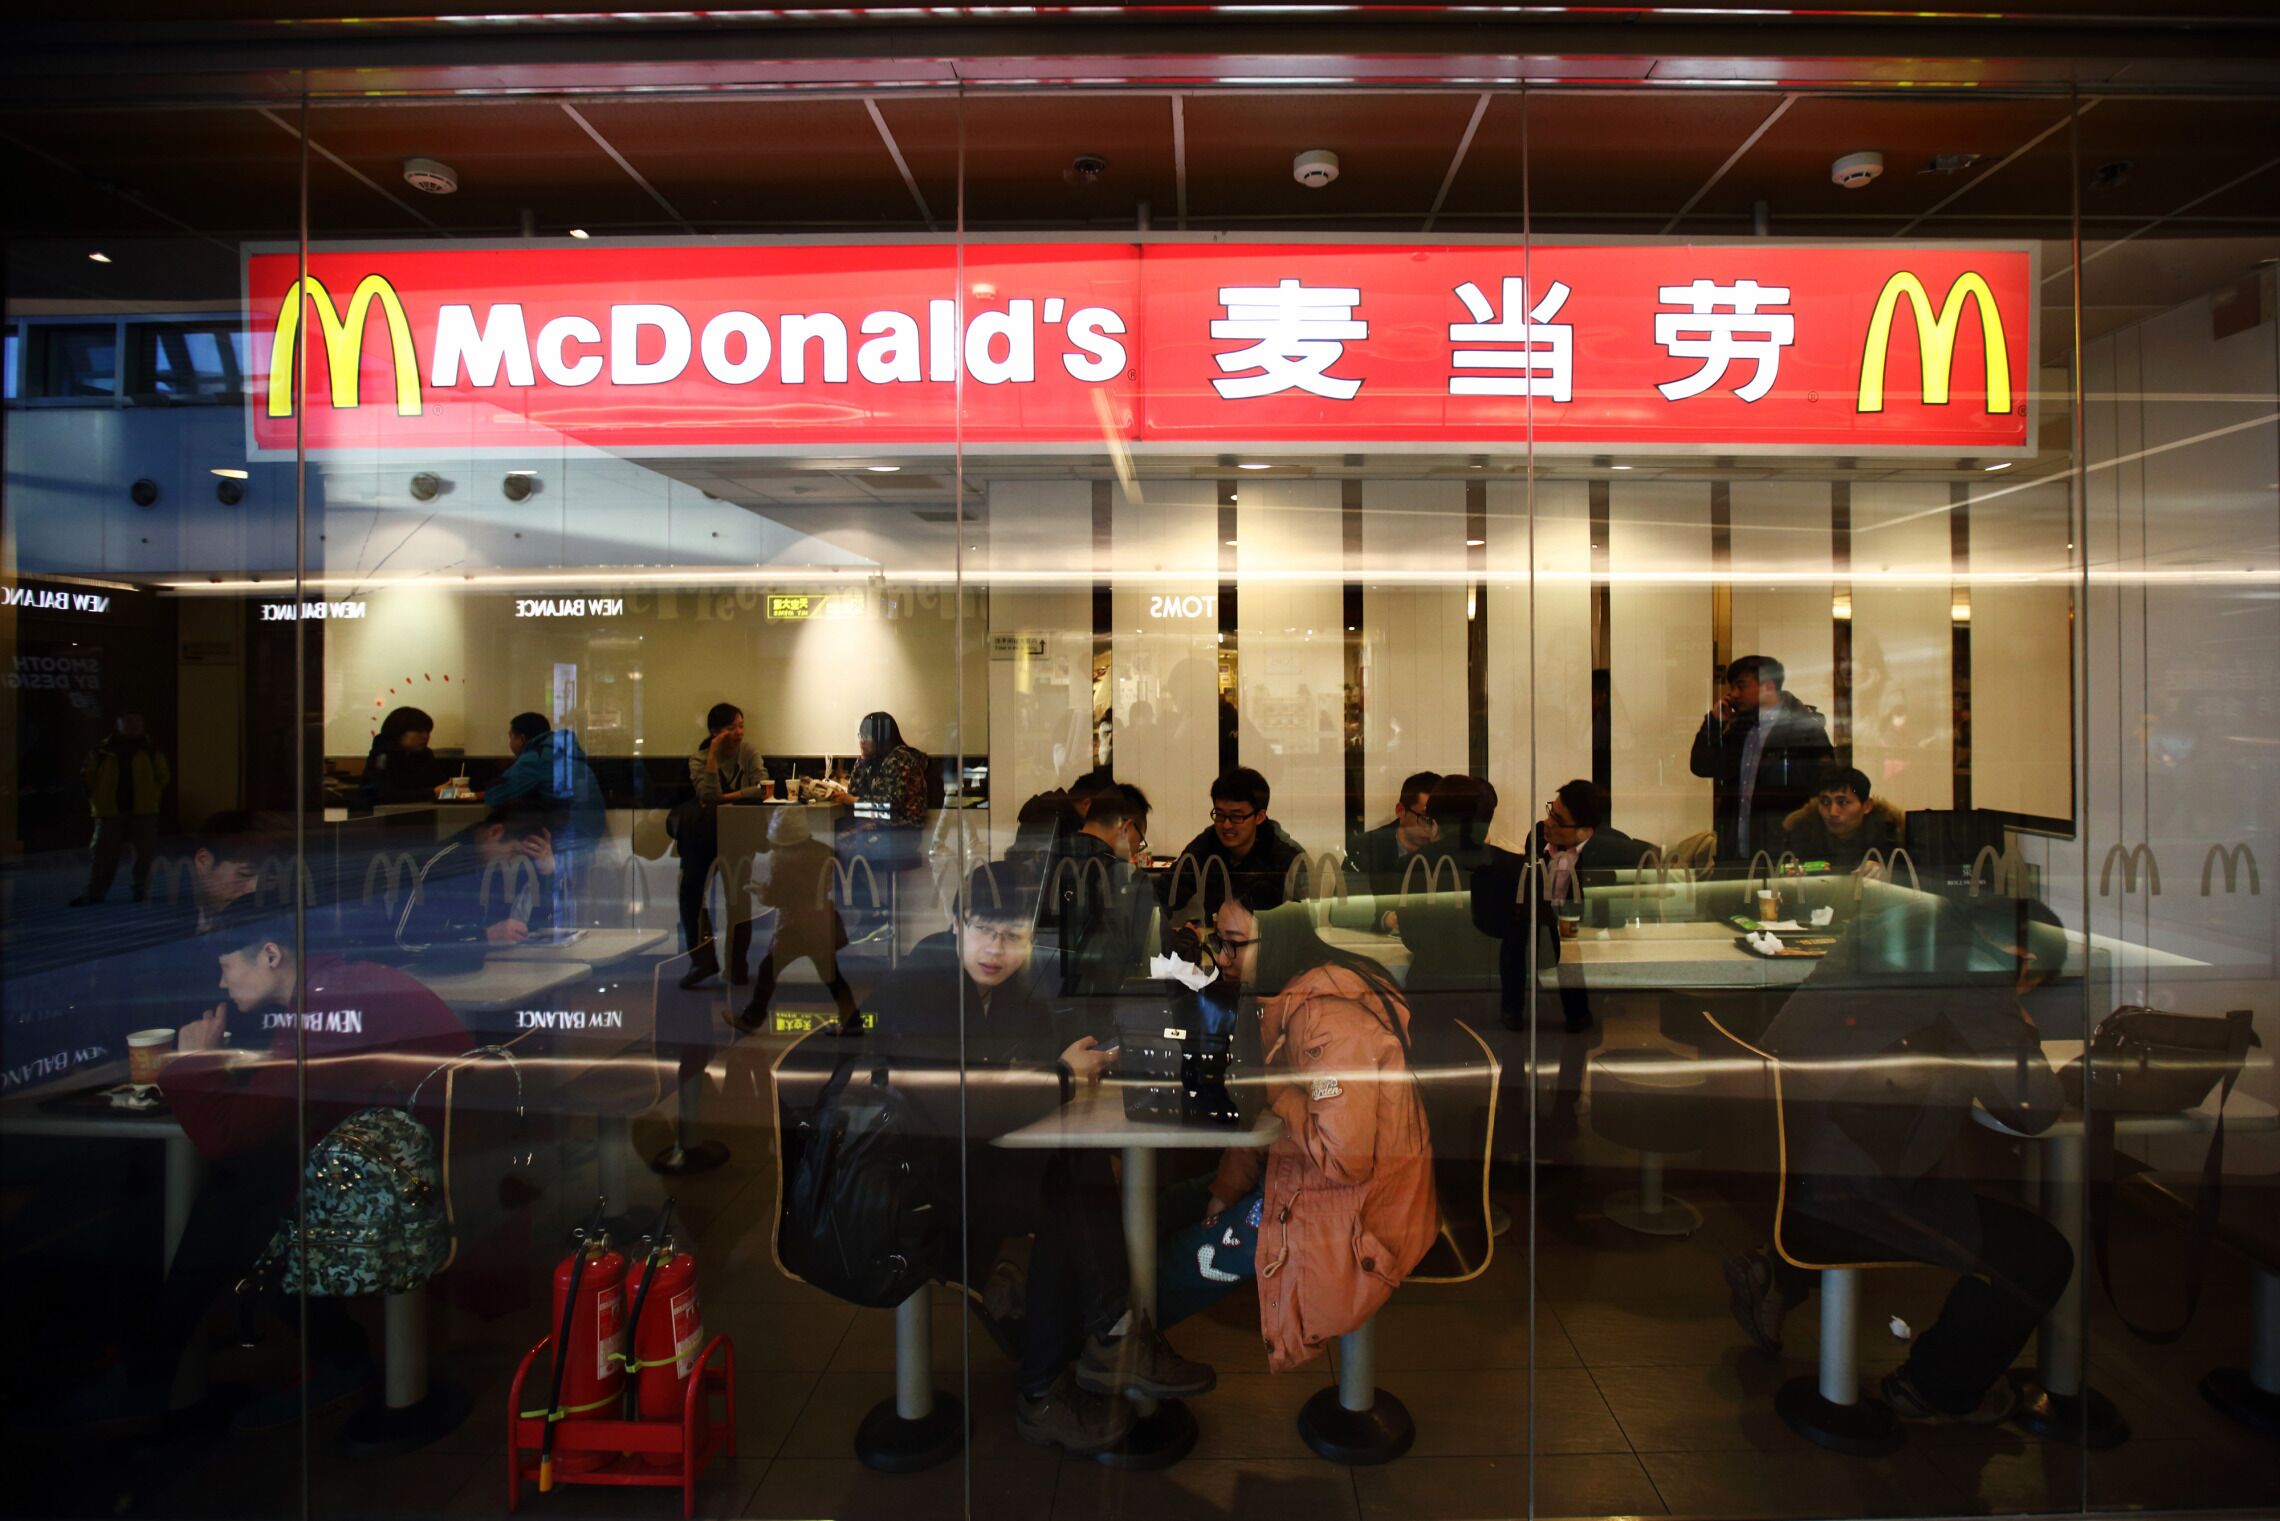 mcdonald’s china is said to attract sovereign wealth funds